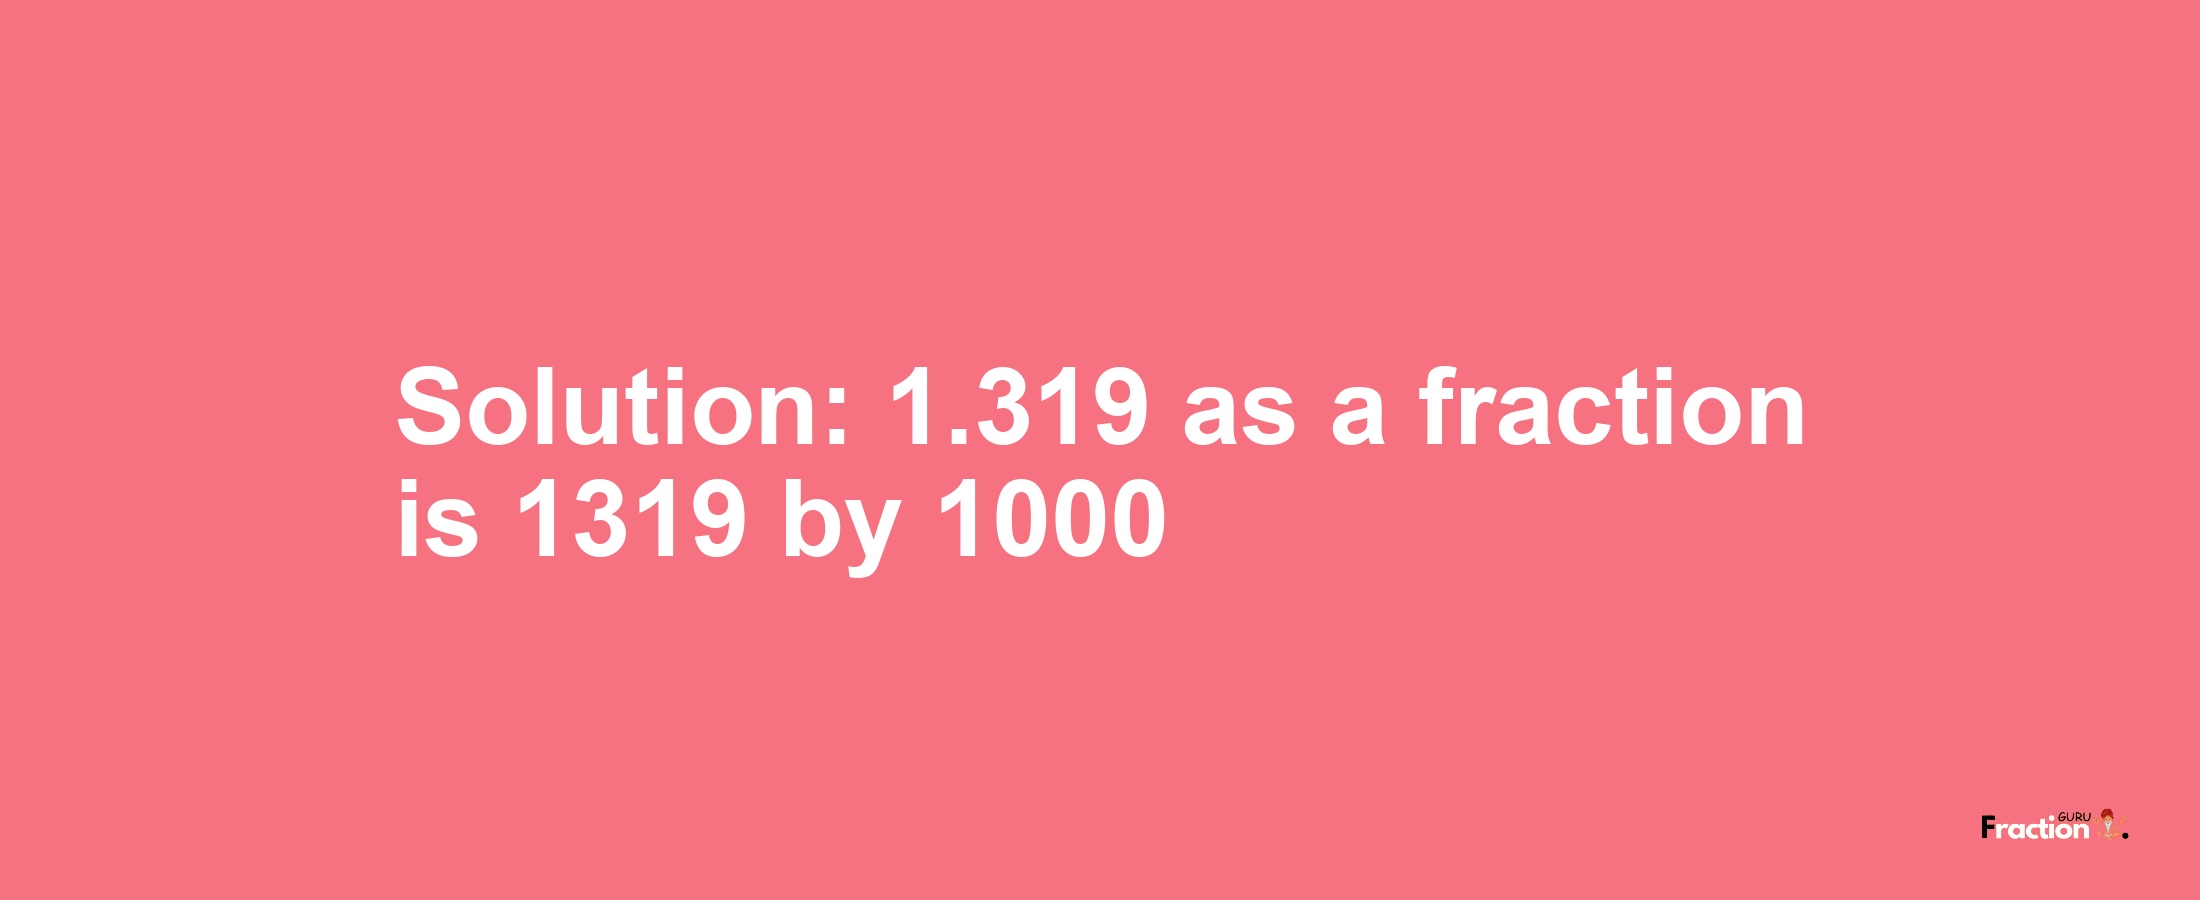 Solution:1.319 as a fraction is 1319/1000